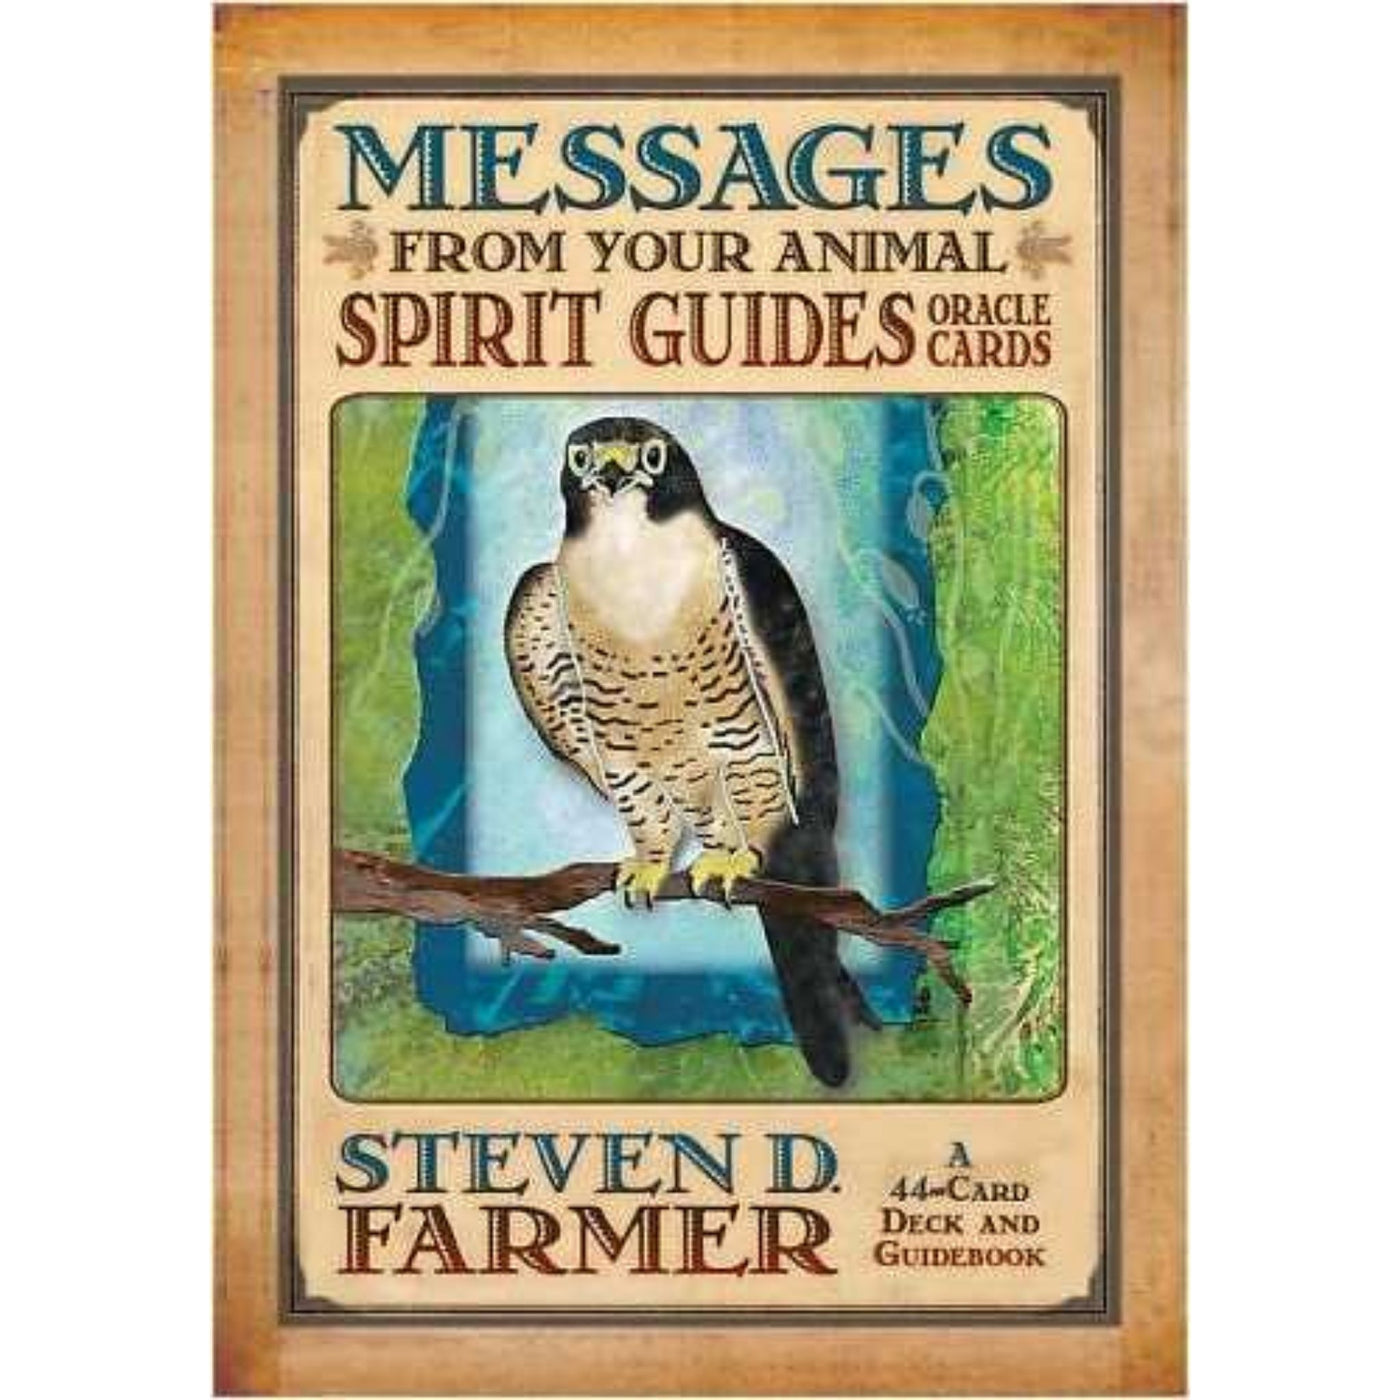 Messages from your animal spirit guides